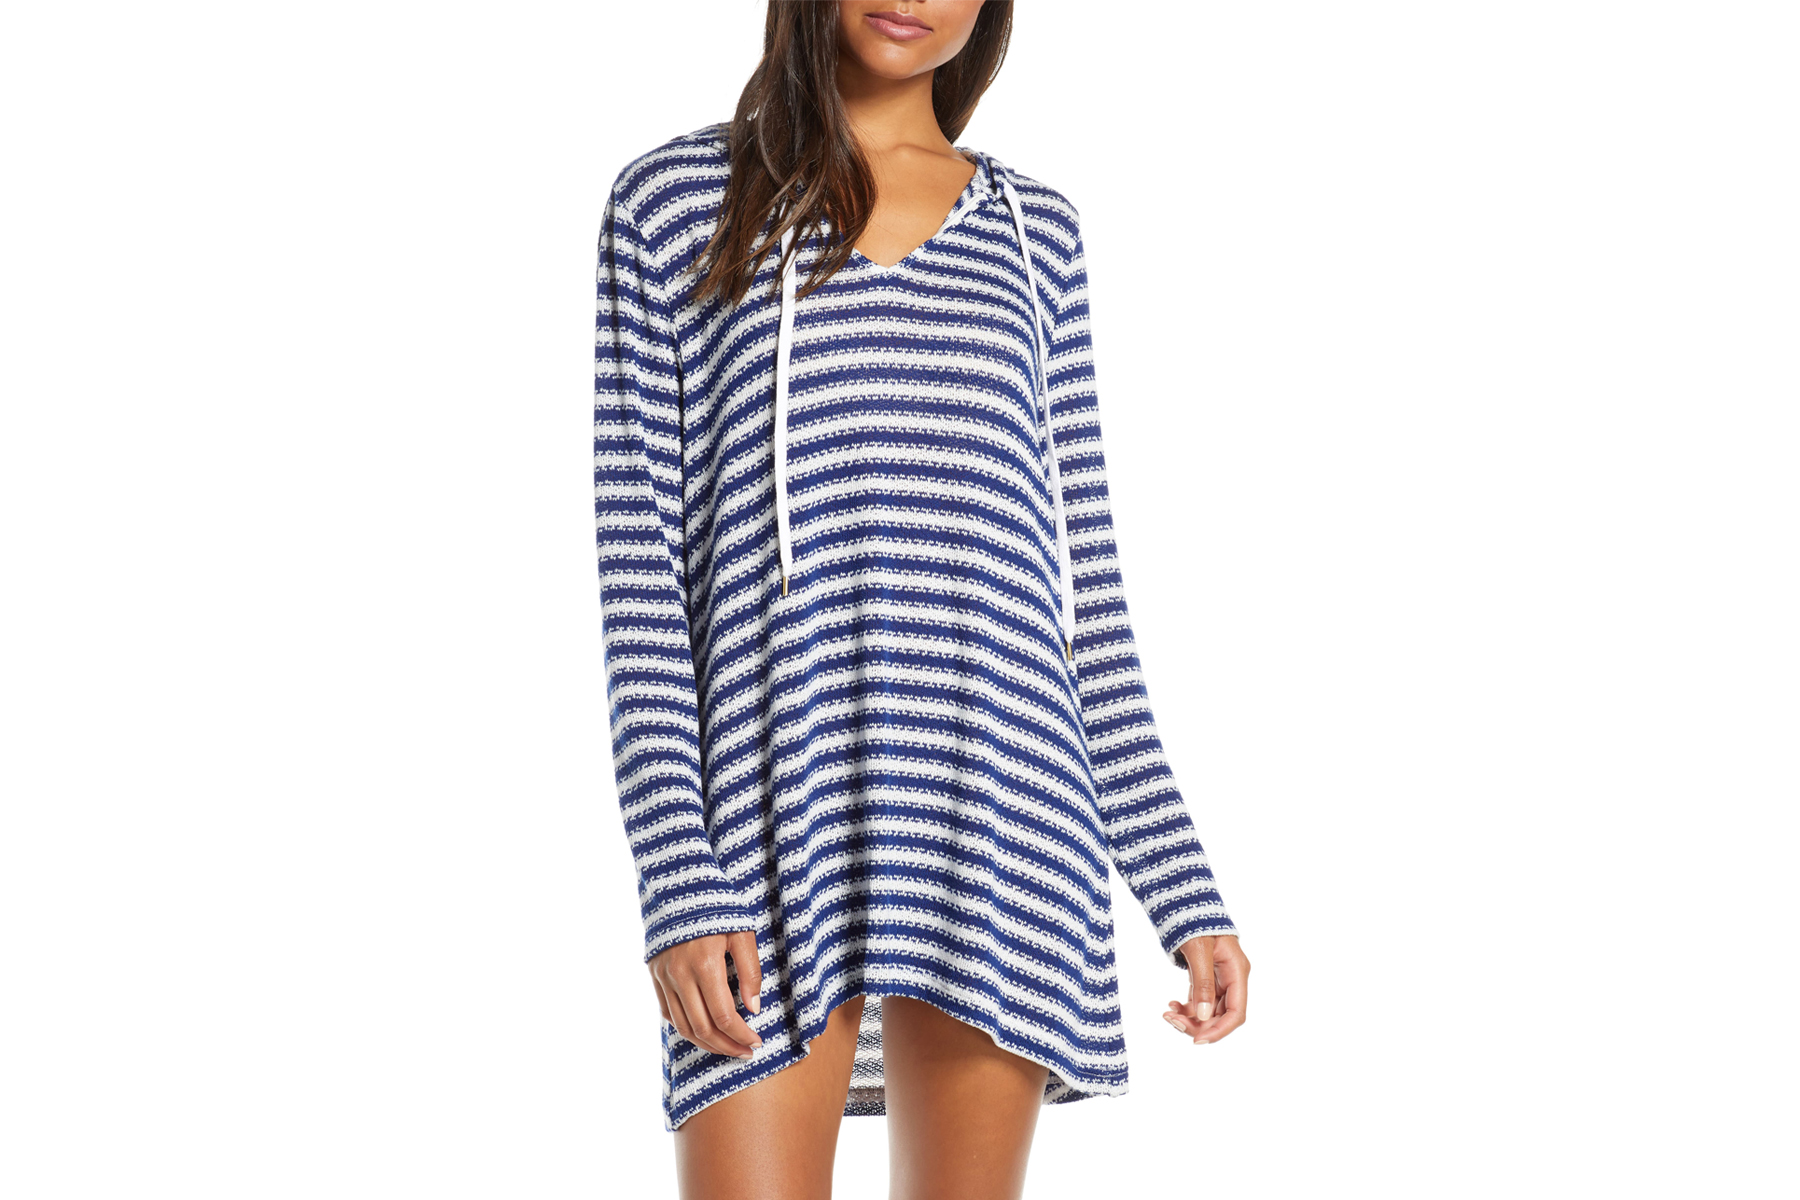 Swim Cover Ups That Are as Practical as They Are Stylish